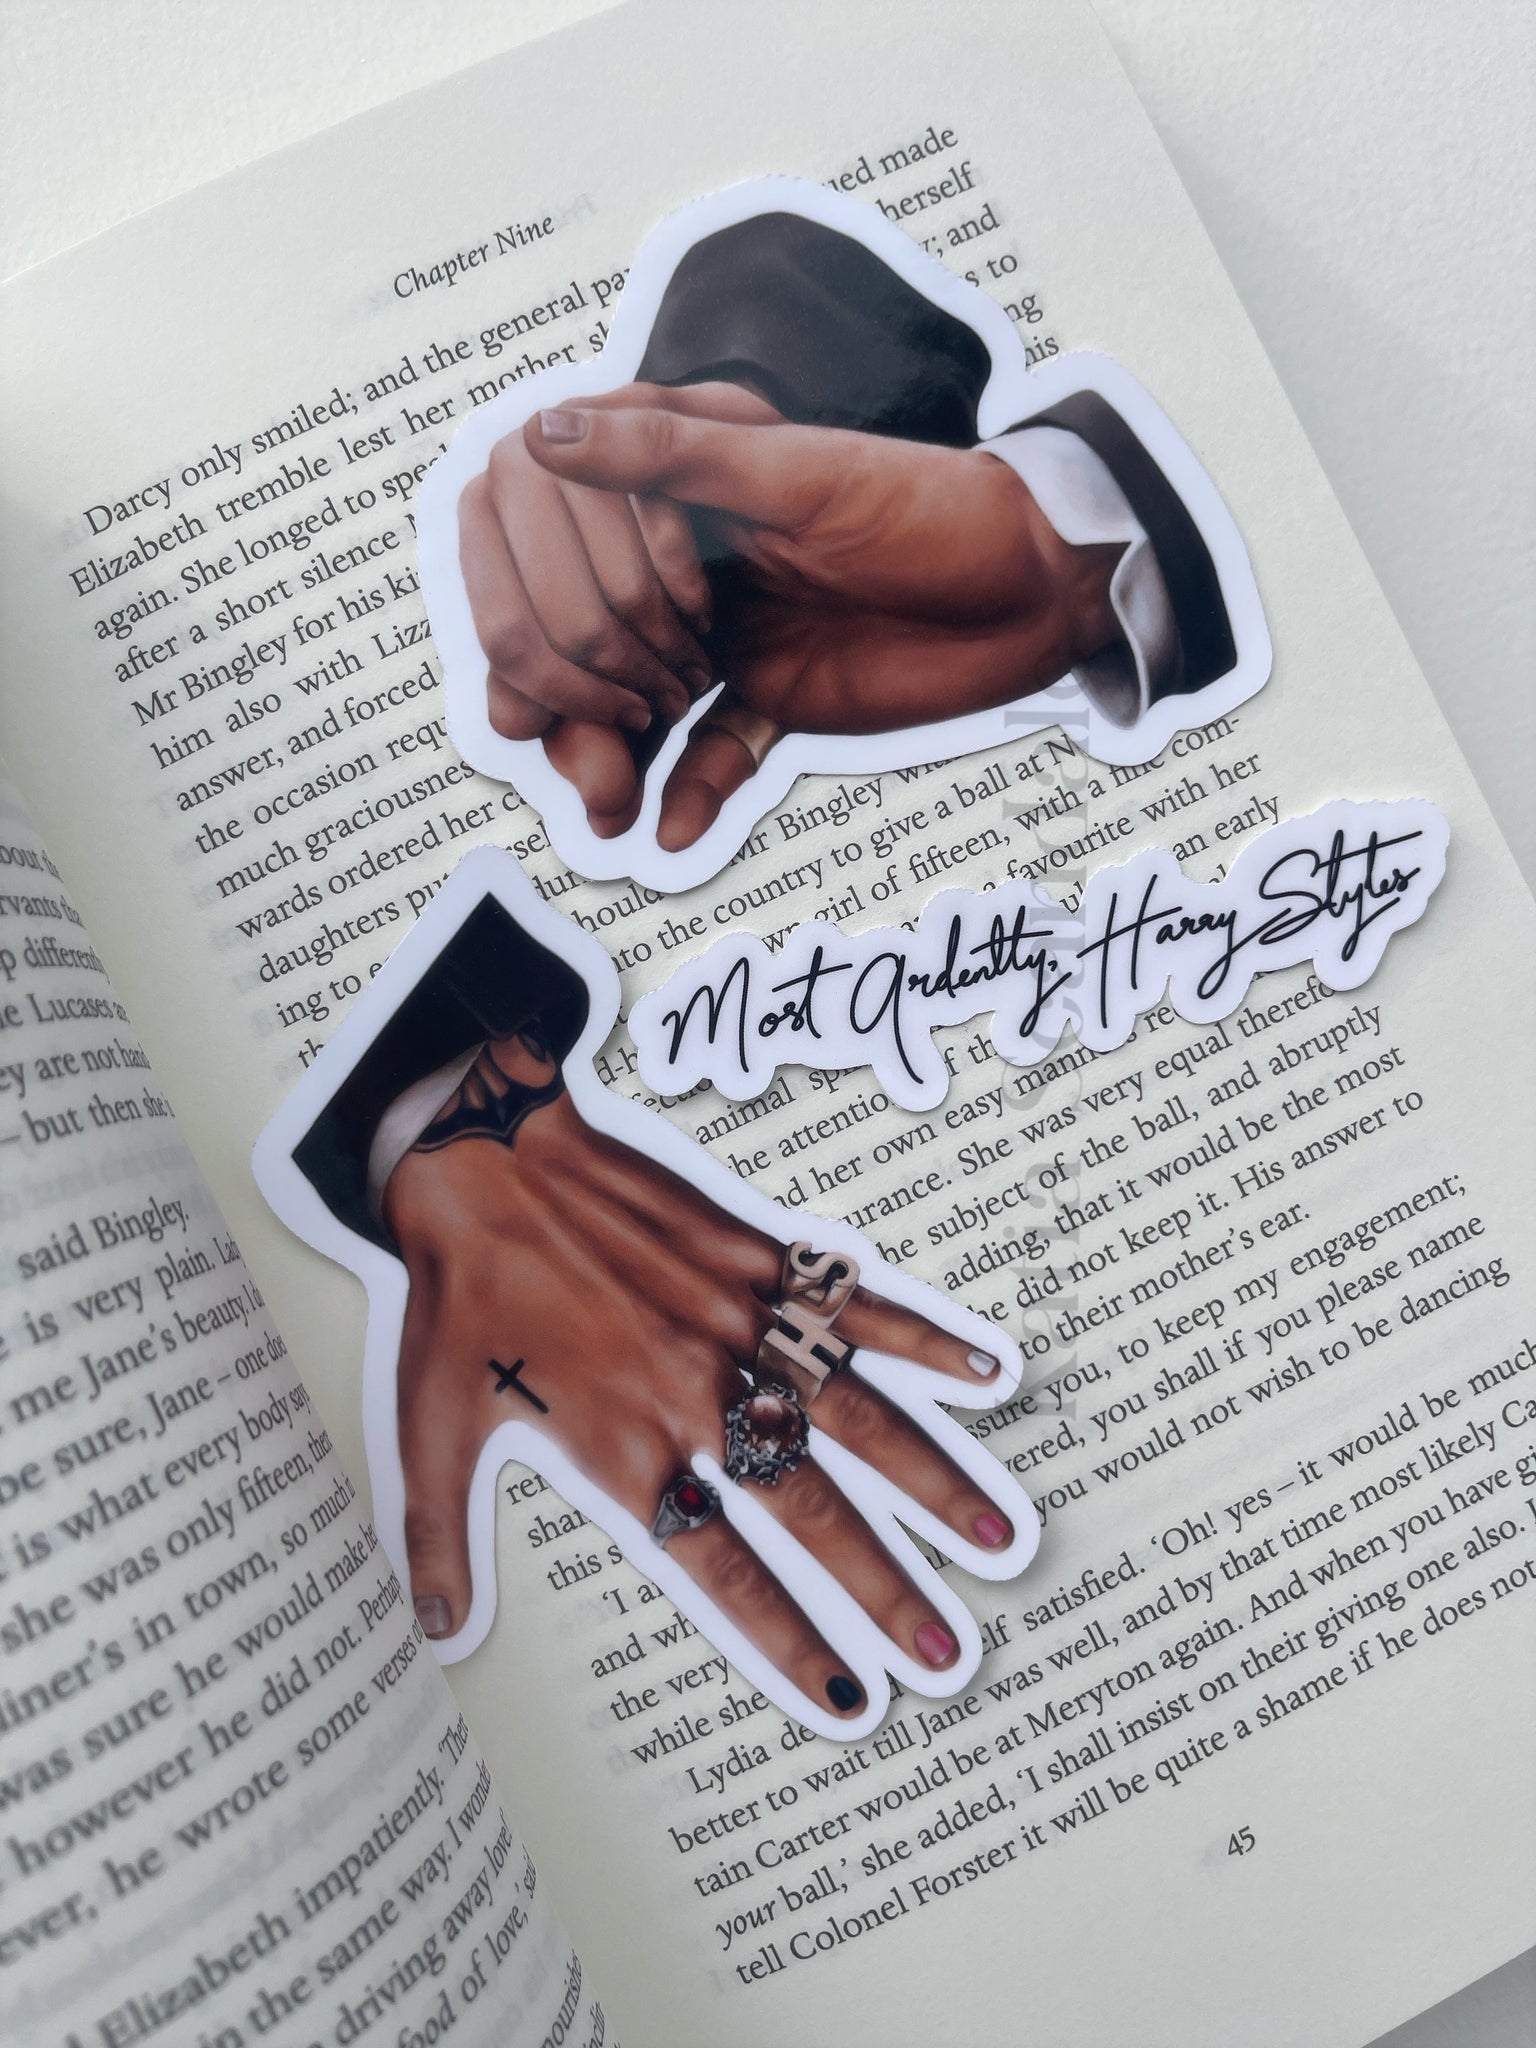 "Most Ardently, Harry Styles" Stickers